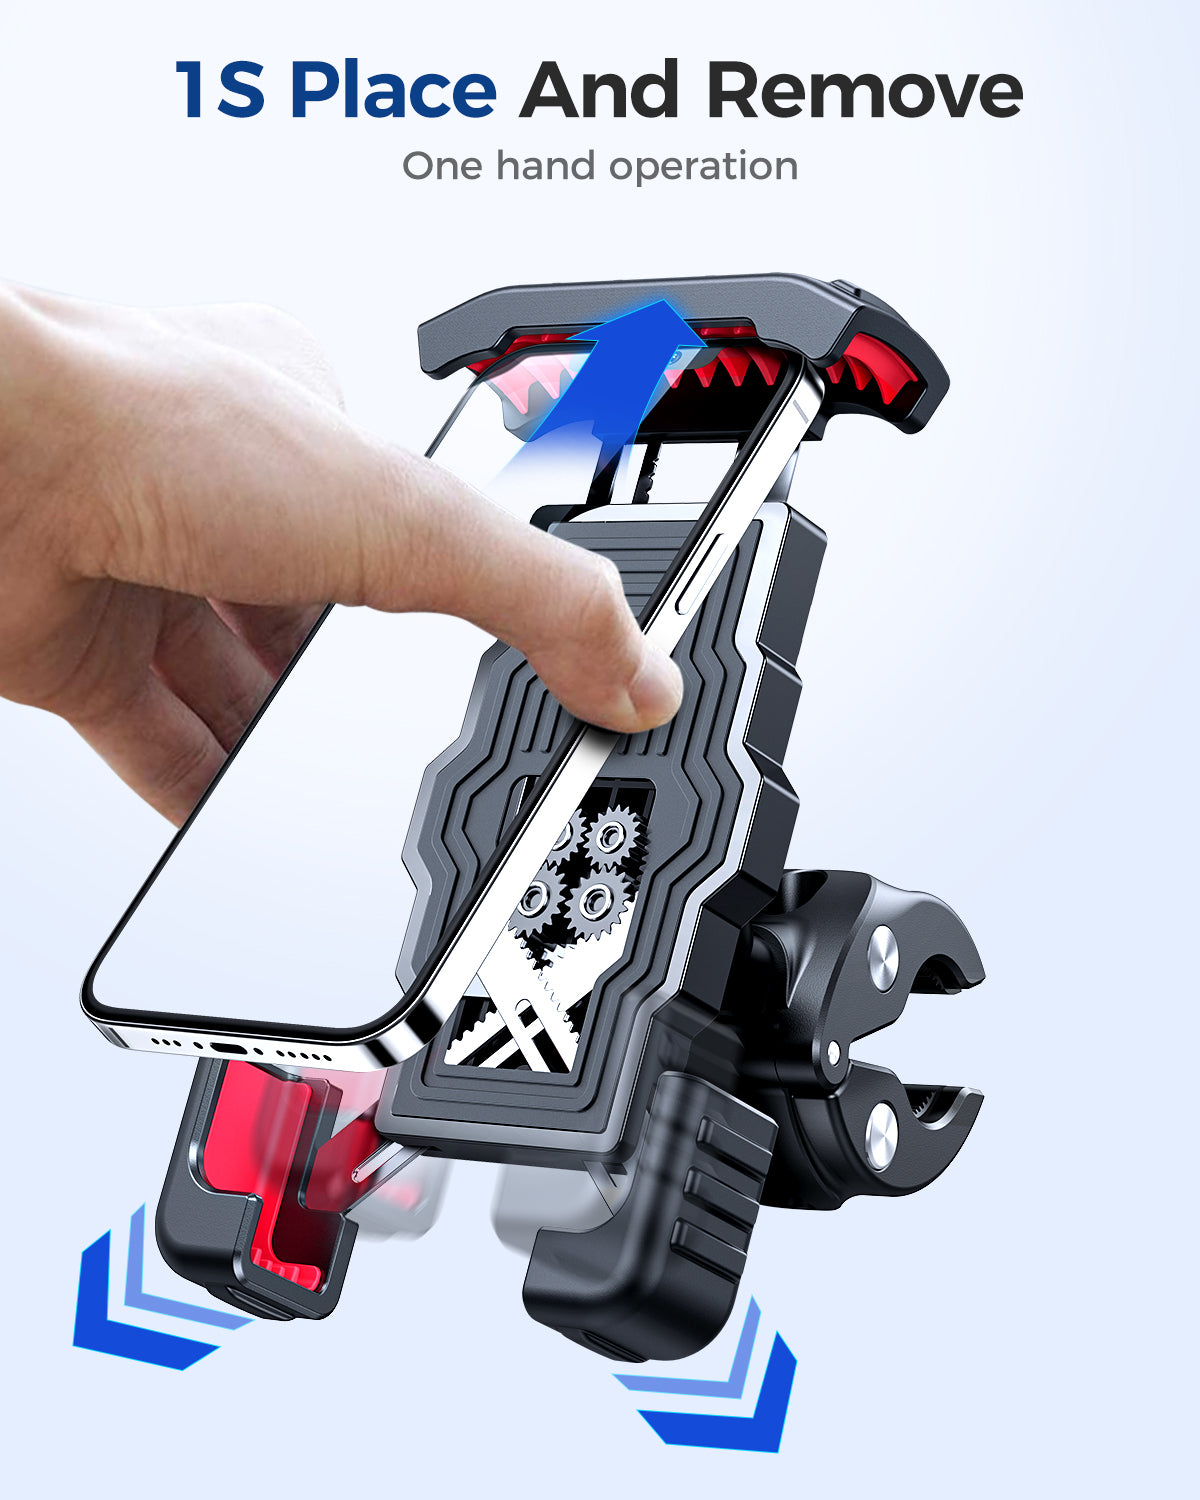 One-Push Motorcycle Phone Mount,15s Quickly Install,1 Second Automatically Lock & Release,High-Speed Secure Switch,Bike Accessories for Motorcycle,Widely Compatible for Cellphone(4.7"-7")